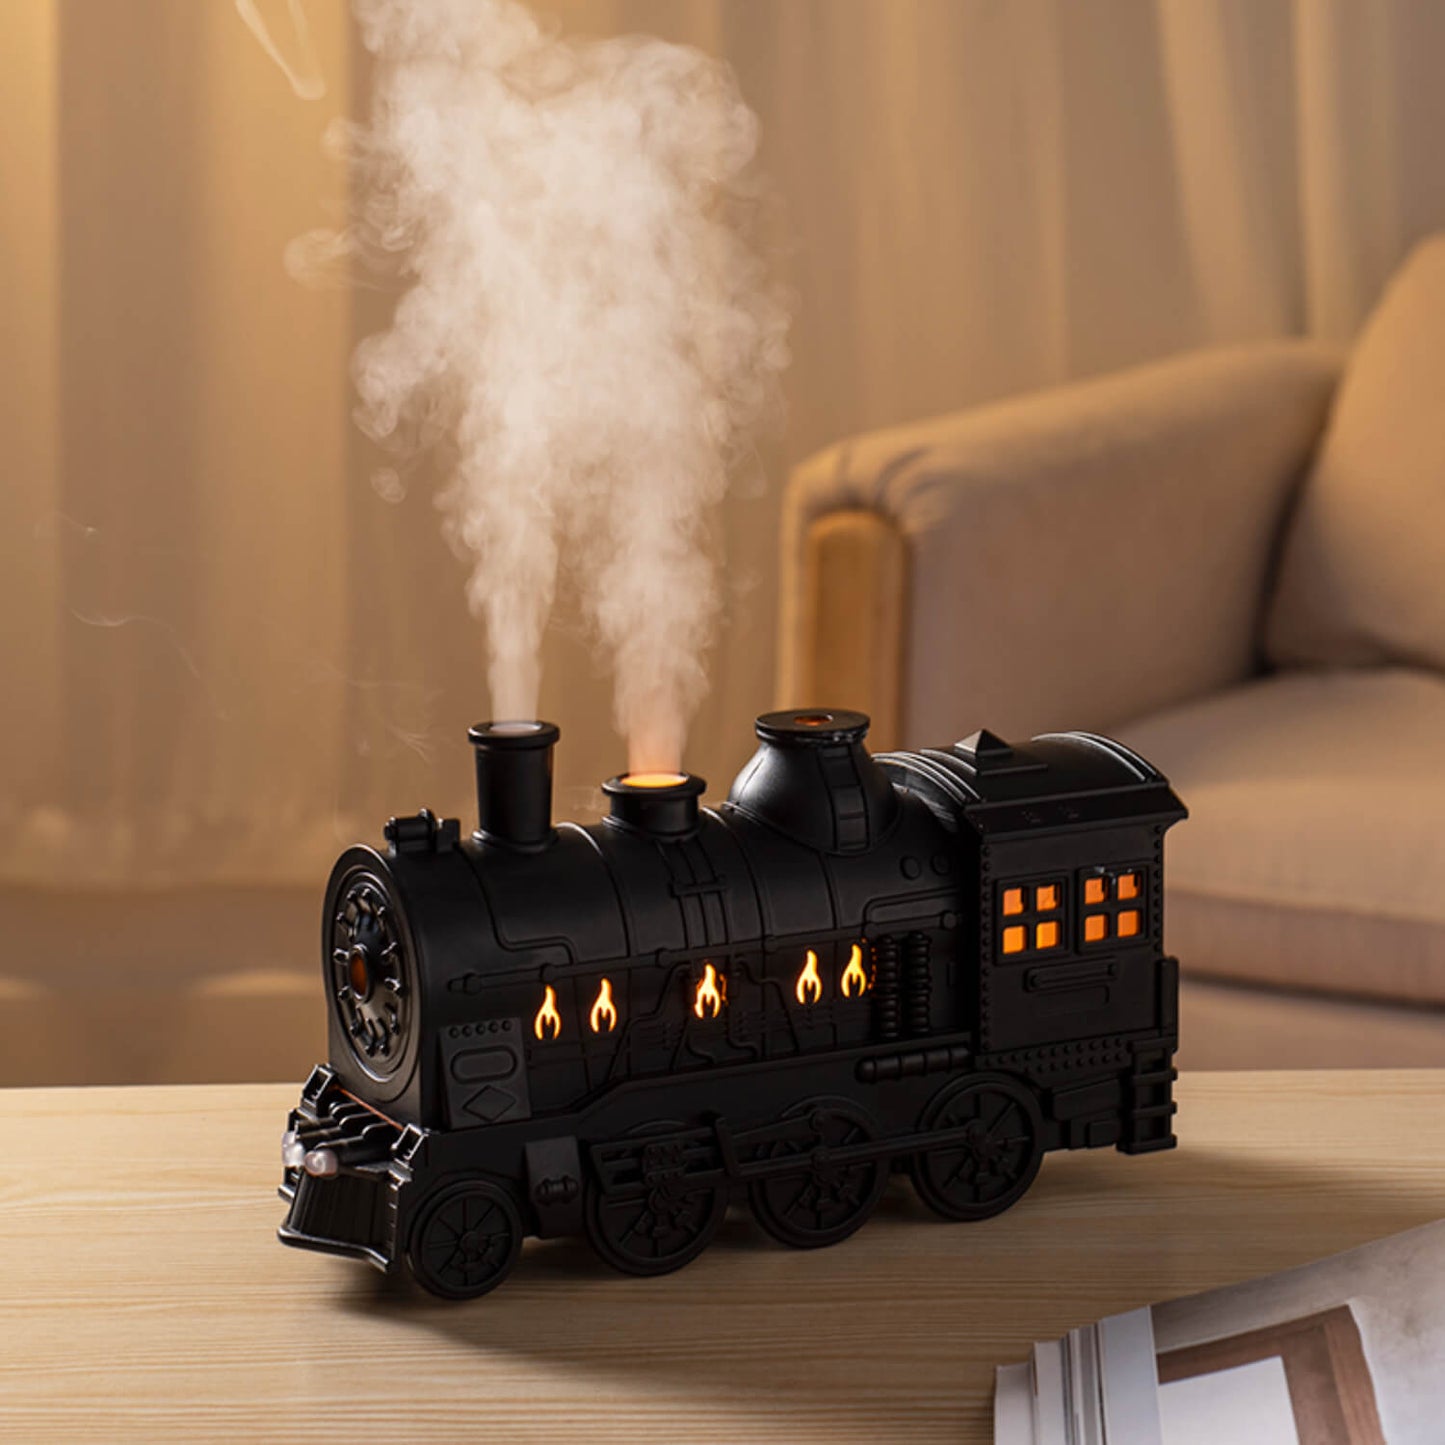 Transform your environment effortlessly and indulge in relaxation with our Small Train Aroma Humidifier. 🌈🚂✨